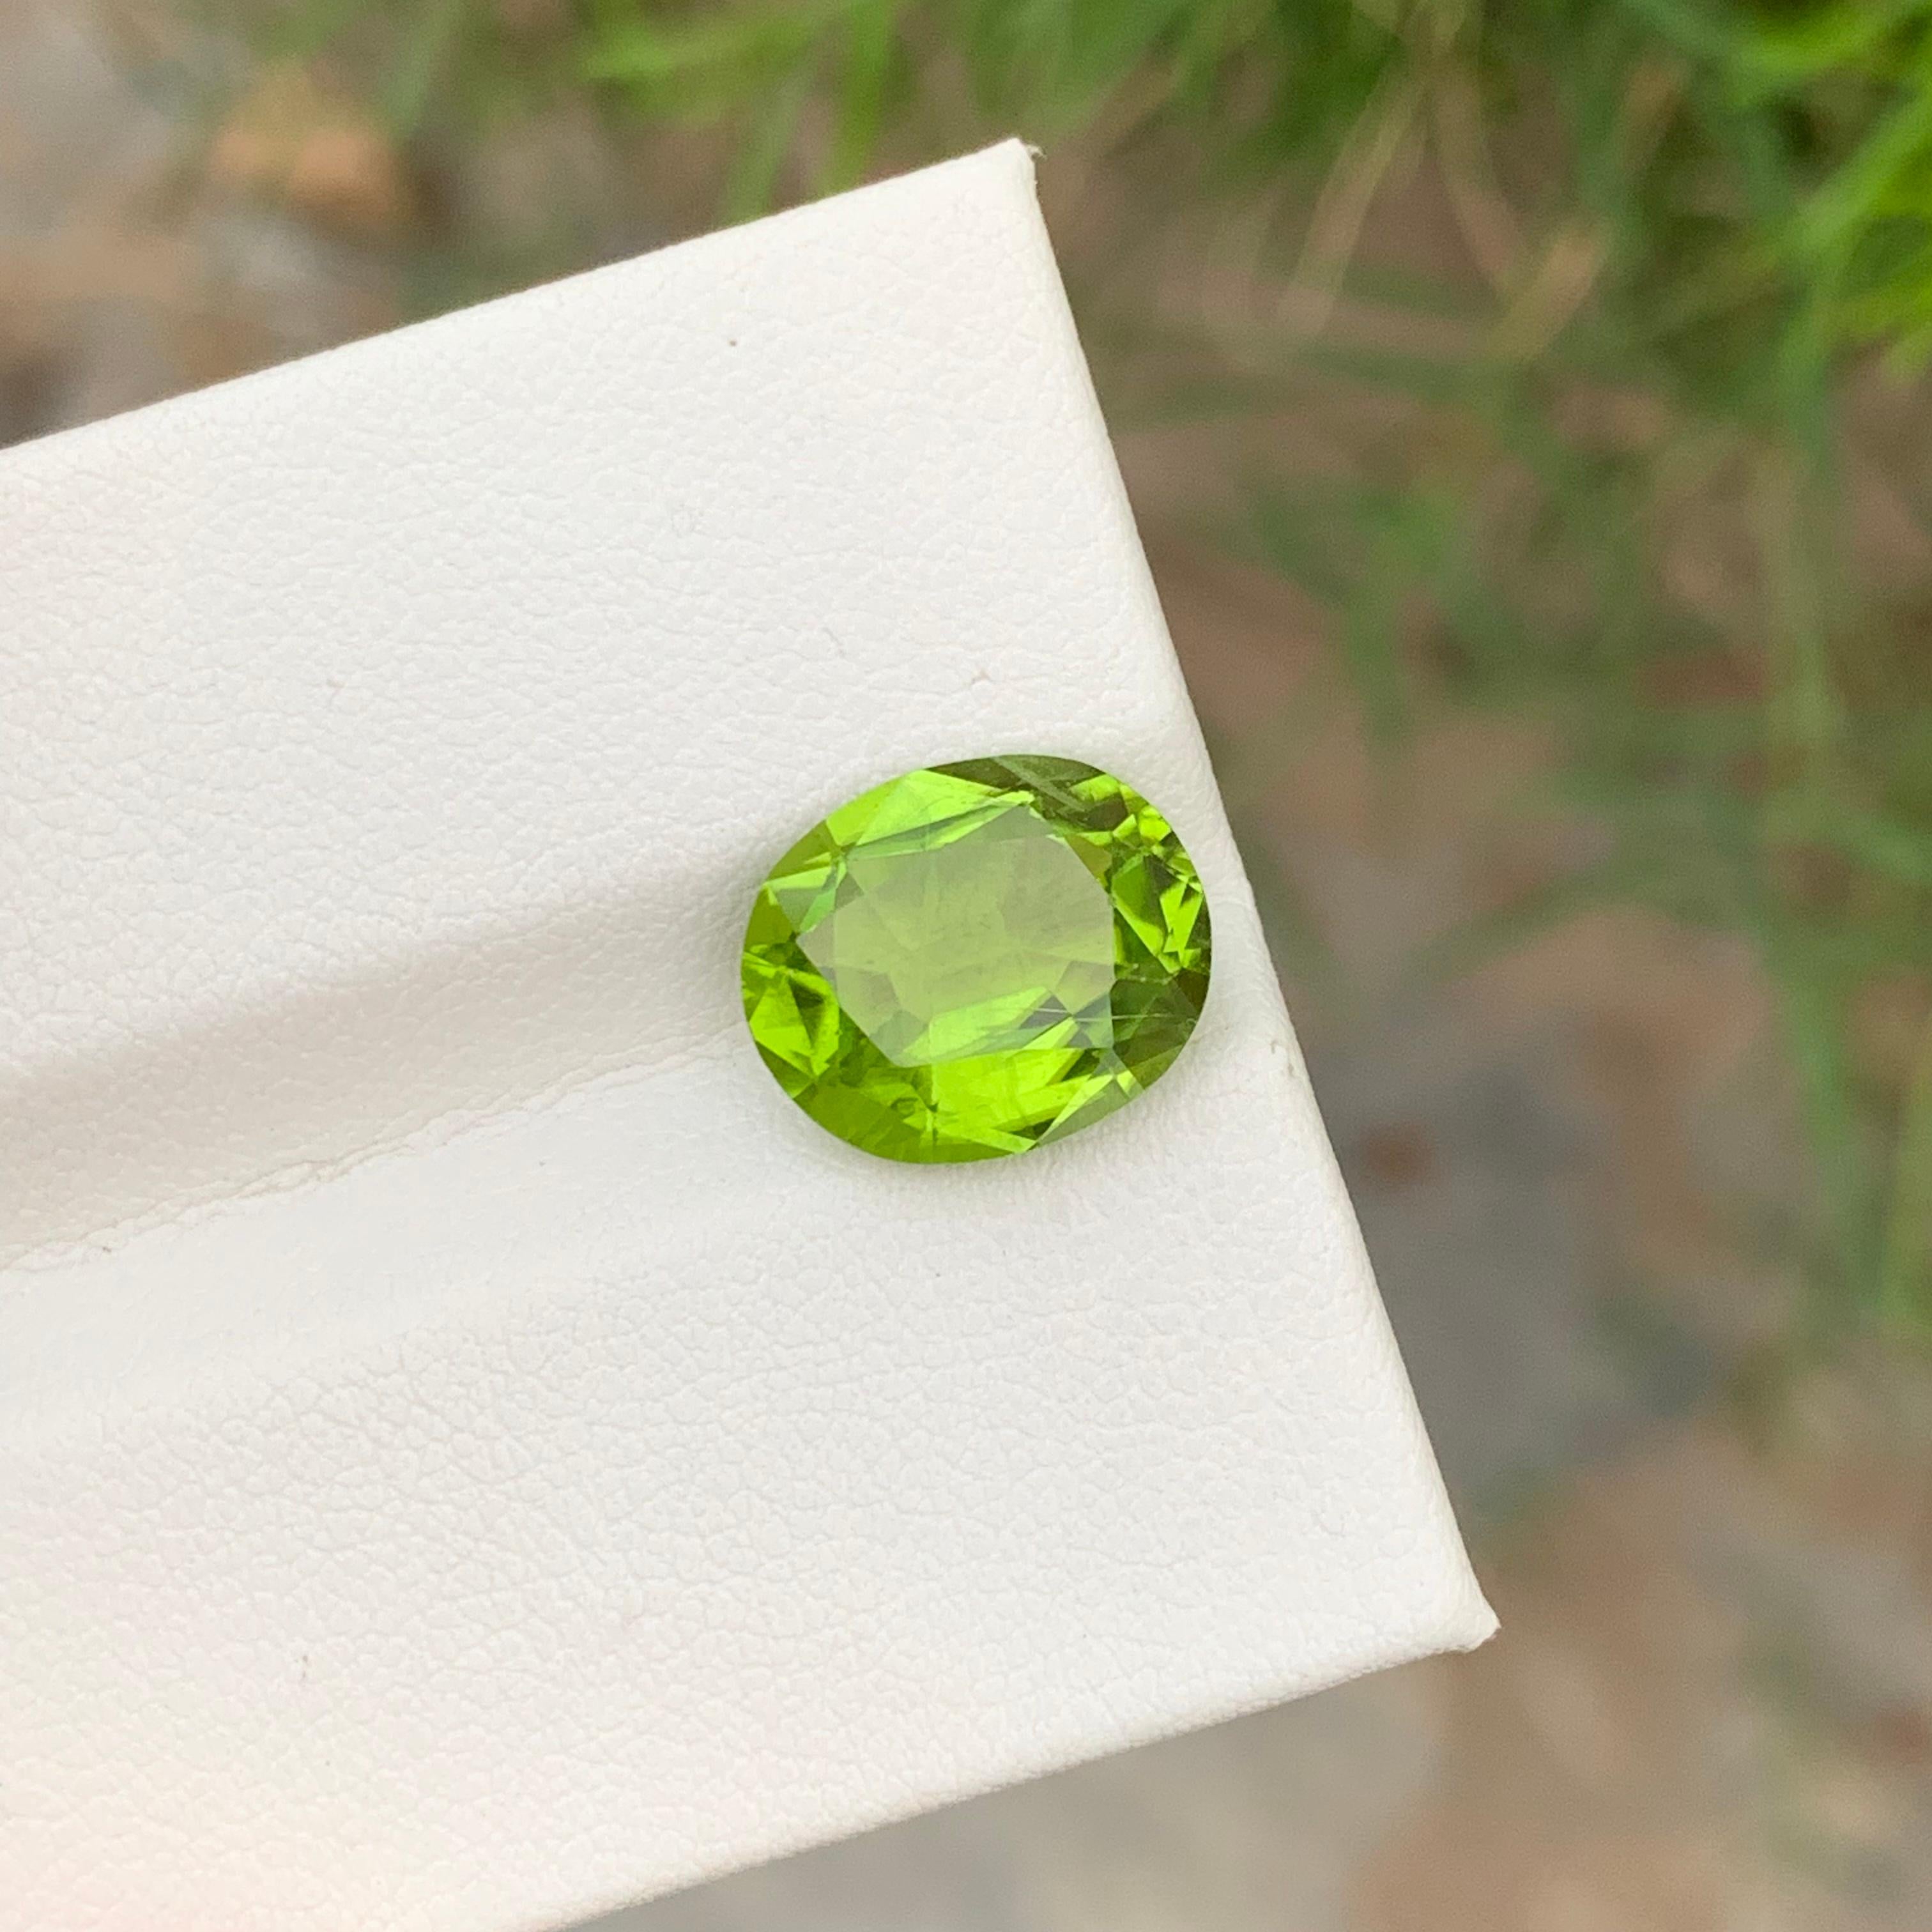 5.35 Carats Natural Apple Green Loose Peridot Gem From Suppart Valley Mine For Sale 3